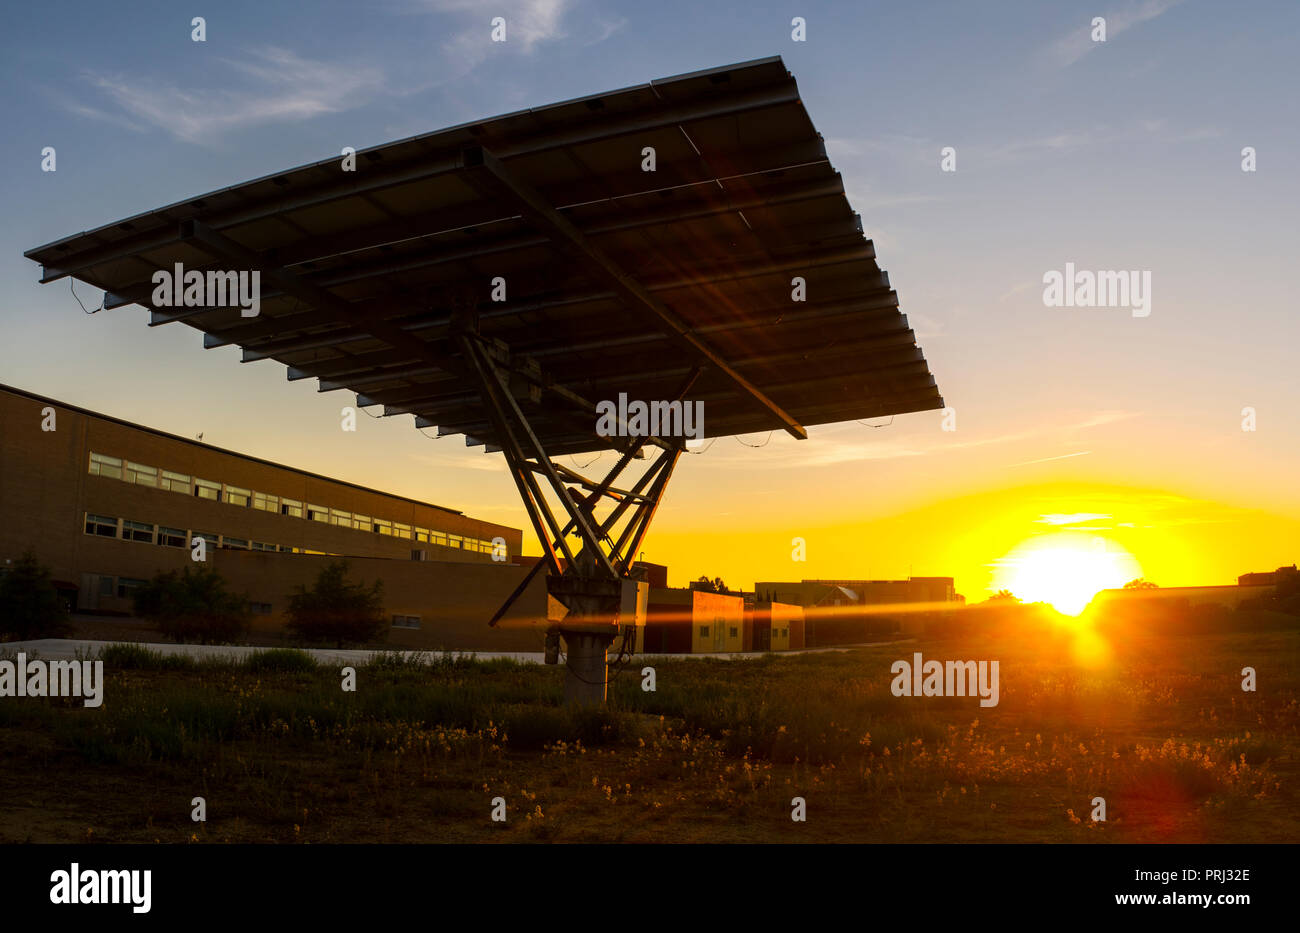 Urban photovoltaic panel with solar tracker placed outdoors building Stock Photo